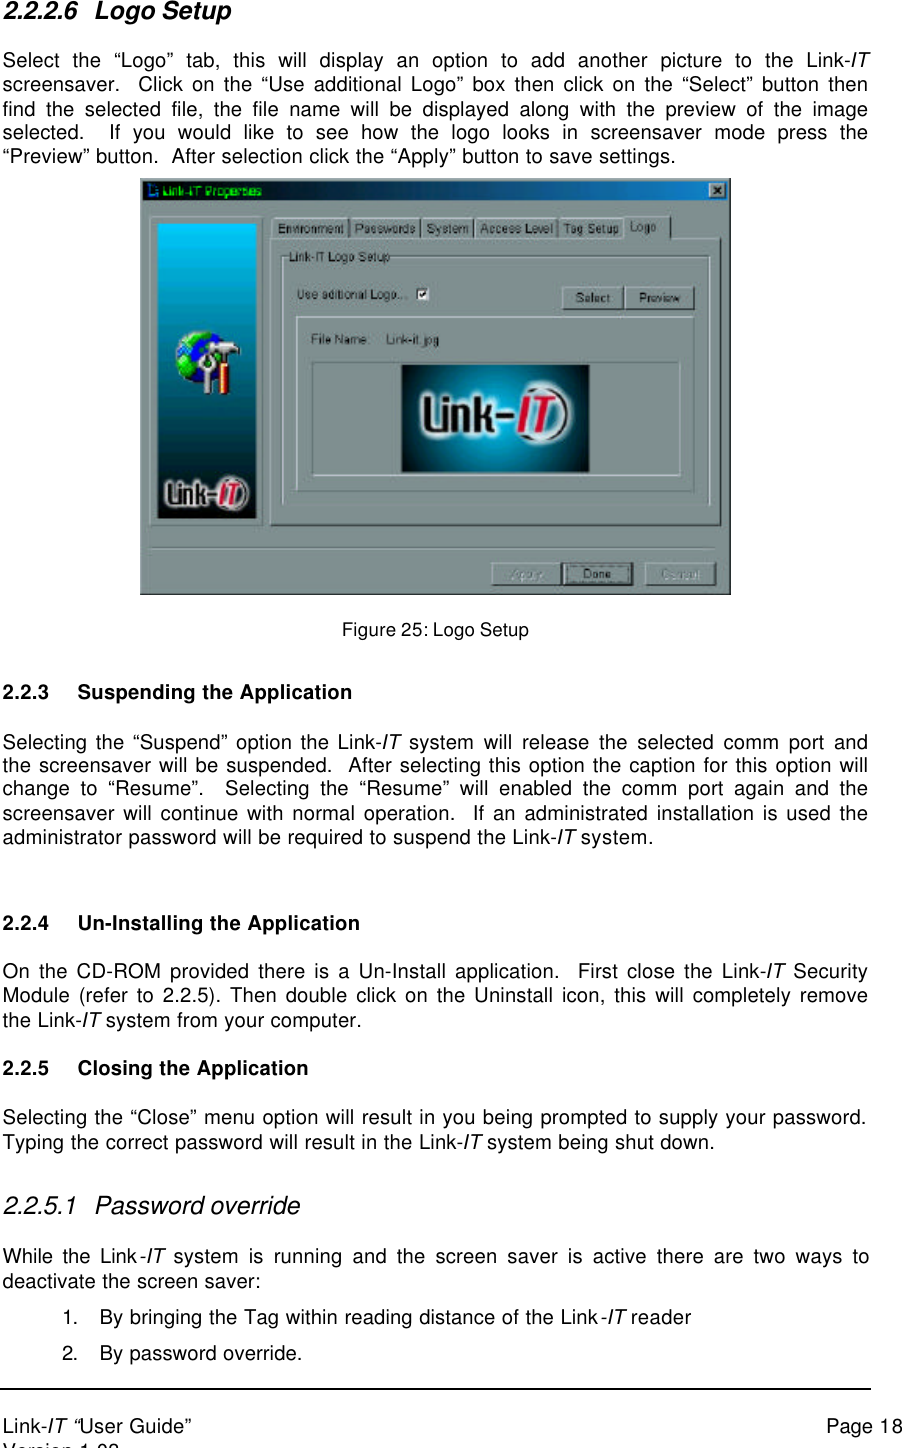 Link-IT “User Guide” Page 18Version 1.032.2.2.6 Logo SetupSelect the “Logo” tab, this will display an option to add another picture to the Link-ITscreensaver.  Click on the “Use additional Logo” box then click on the “Select” button thenfind the selected file, the file name will be displayed along with the preview of the imageselected.  If you would like to see how the logo looks in screensaver mode press the“Preview” button.  After selection click the “Apply” button to save settings.Figure 25: Logo Setup2.2.3 Suspending the ApplicationSelecting the “Suspend” option the Link-IT system will release the selected comm port andthe screensaver will be suspended.  After selecting this option the caption for this option willchange to “Resume”.  Selecting the “Resume” will enabled the comm port again and thescreensaver will continue with normal operation.  If an administrated installation is used theadministrator password will be required to suspend the Link-IT system.2.2.4 Un-Installing the ApplicationOn the CD-ROM provided there is a Un-Install application.  First close the Link-IT SecurityModule (refer to 2.2.5). Then double click on the Uninstall icon, this will completely removethe Link-IT system from your computer.2.2.5 Closing the ApplicationSelecting the “Close” menu option will result in you being prompted to supply your password.Typing the correct password will result in the Link-IT system being shut down.2.2.5.1 Password overrideWhile the Link-IT system is running and the screen saver is active there are two ways todeactivate the screen saver:1. By bringing the Tag within reading distance of the Link-IT reader2. By password override.